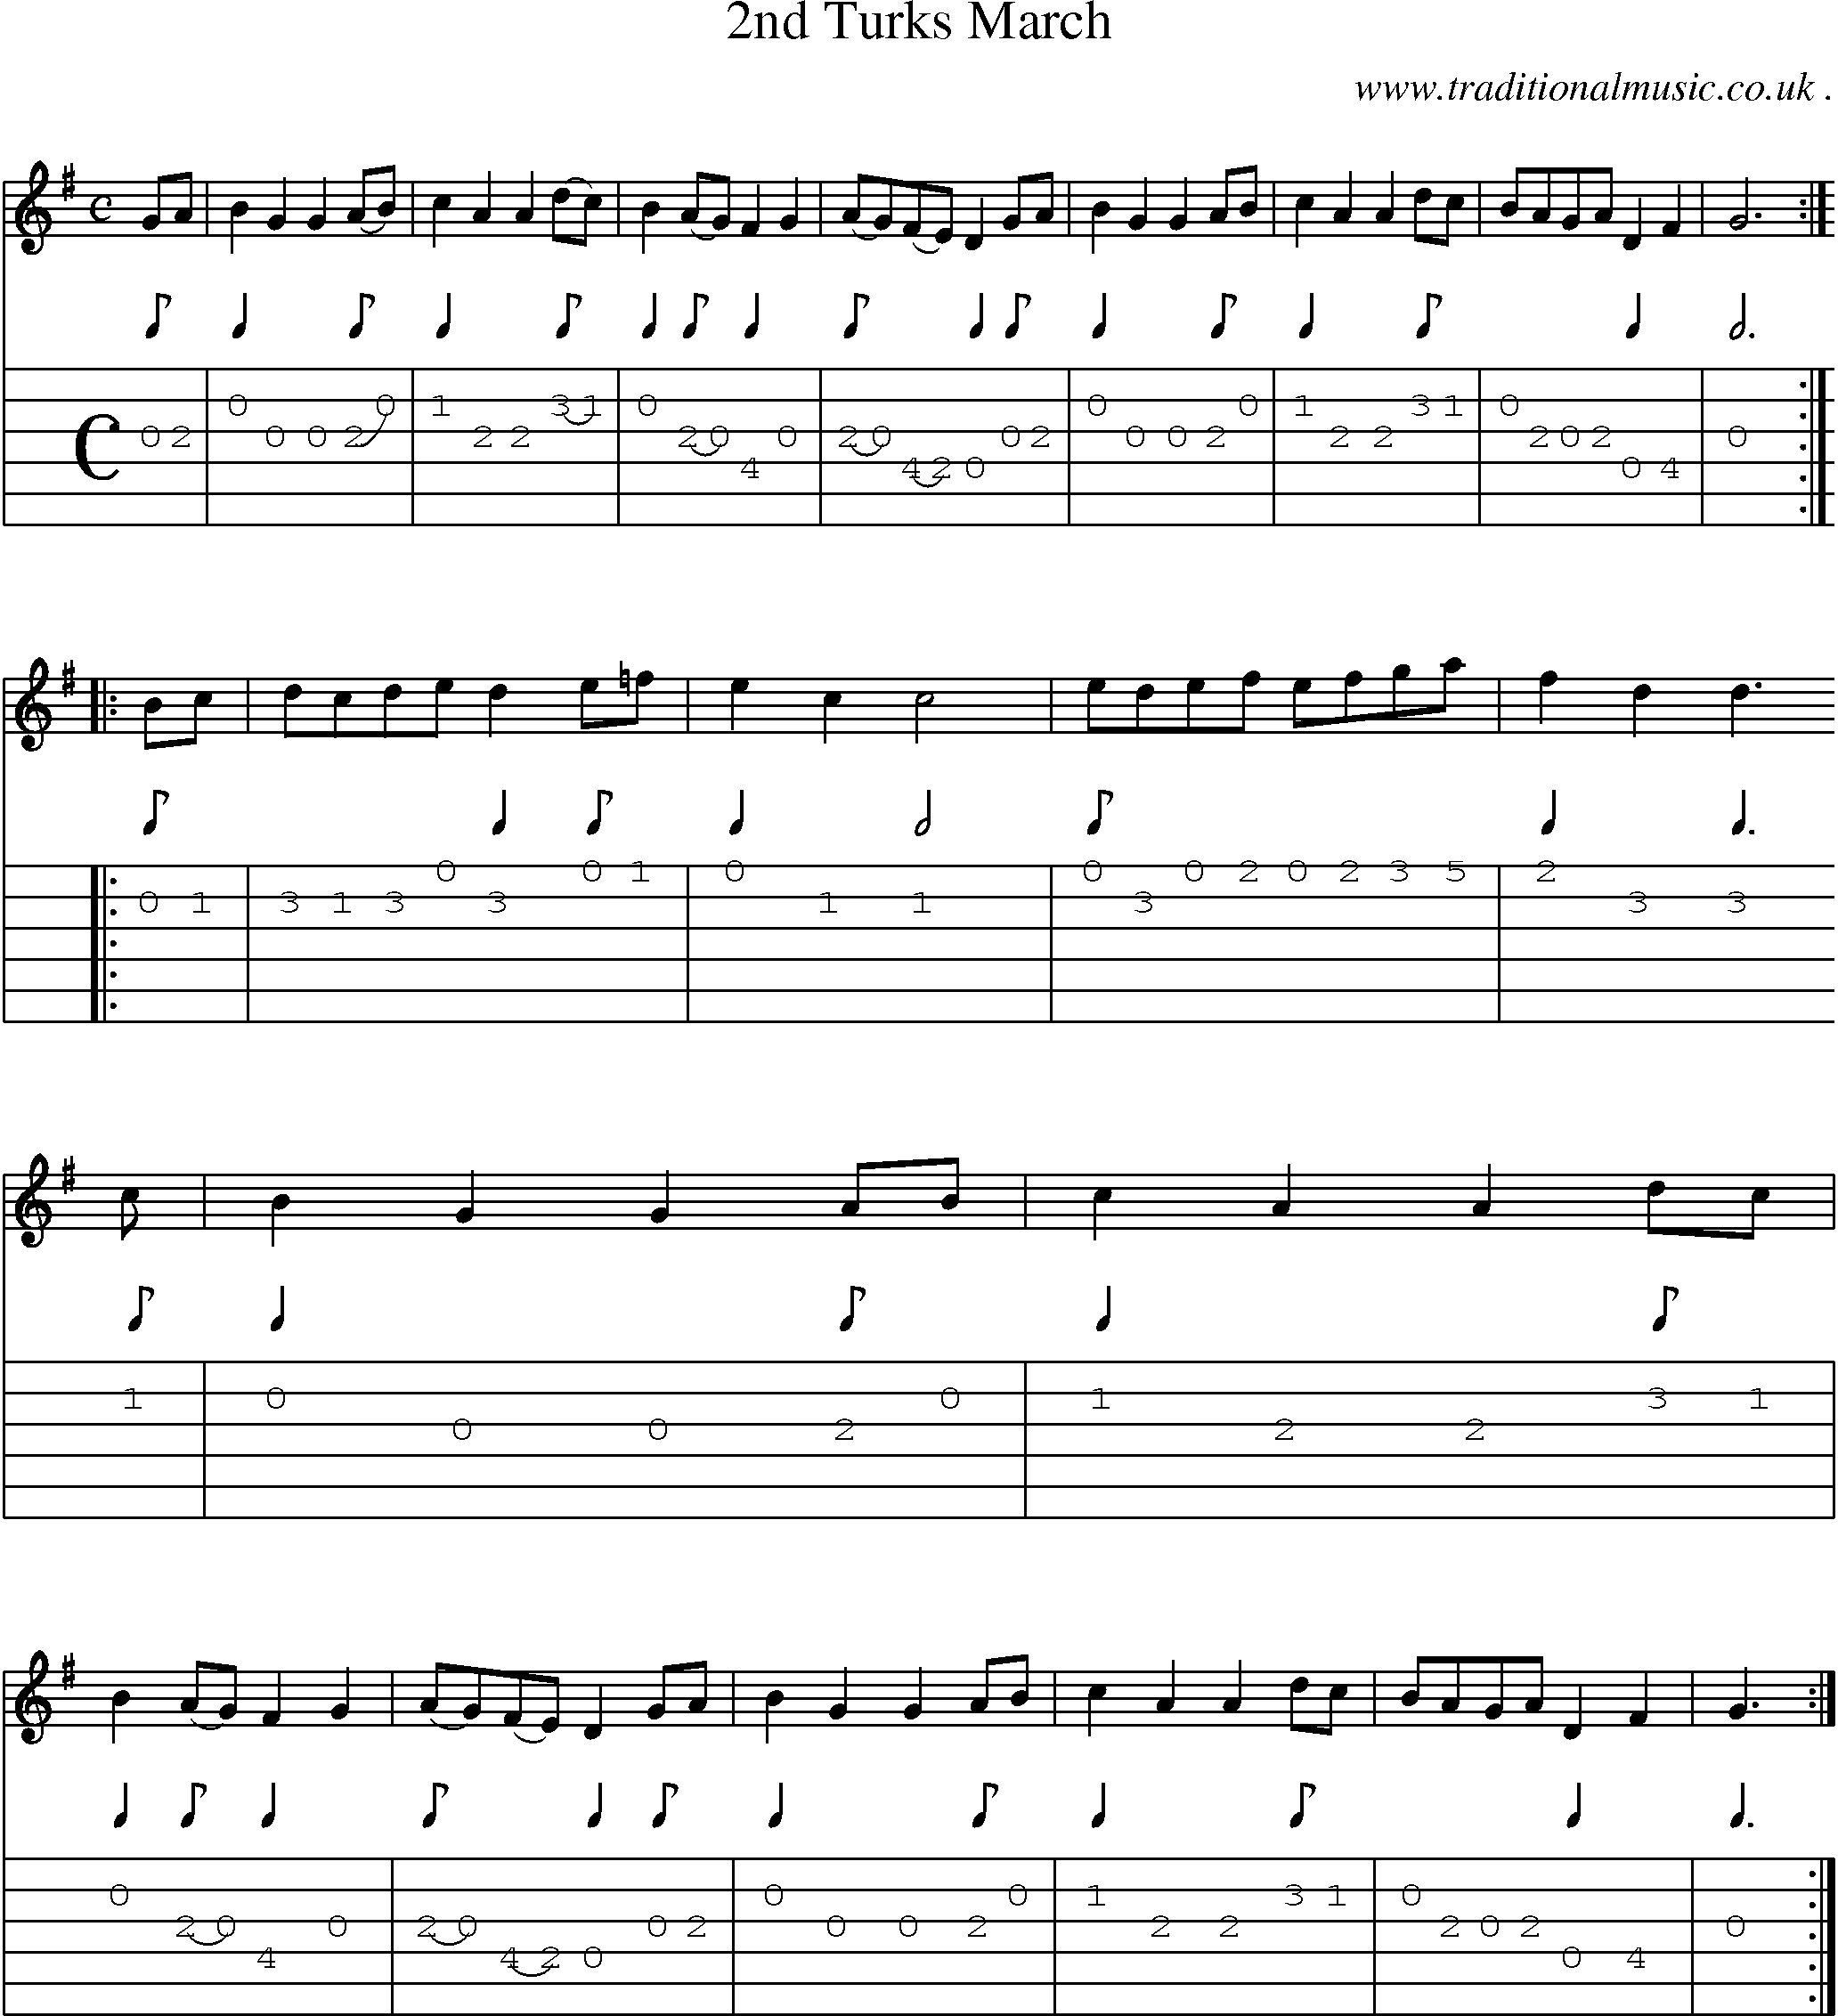 Sheet-Music and Guitar Tabs for 2nd Turks March